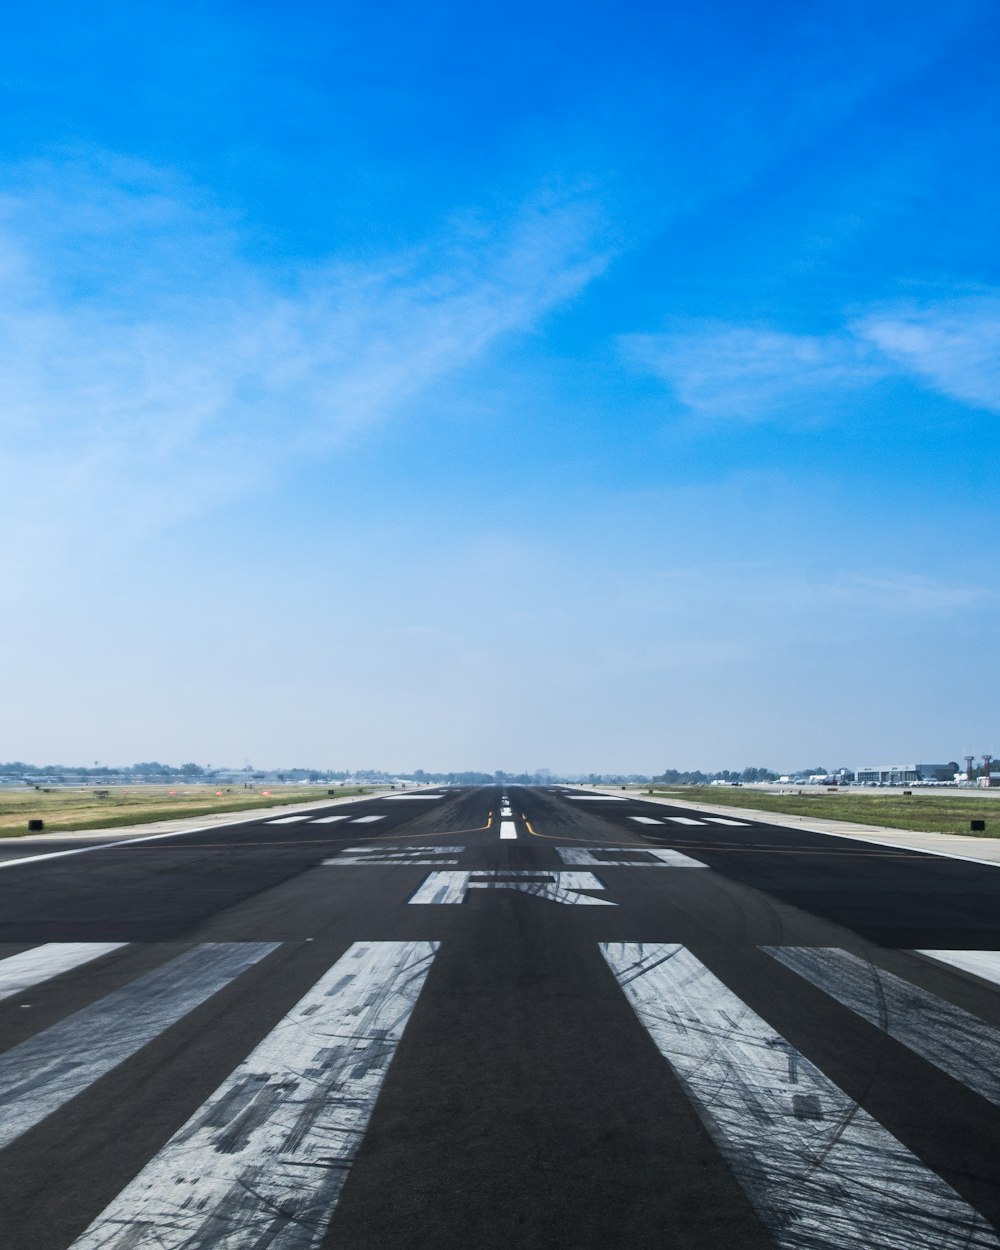 500+ Airport Runway Pictures [HD] | Download Free Images on Unsplash